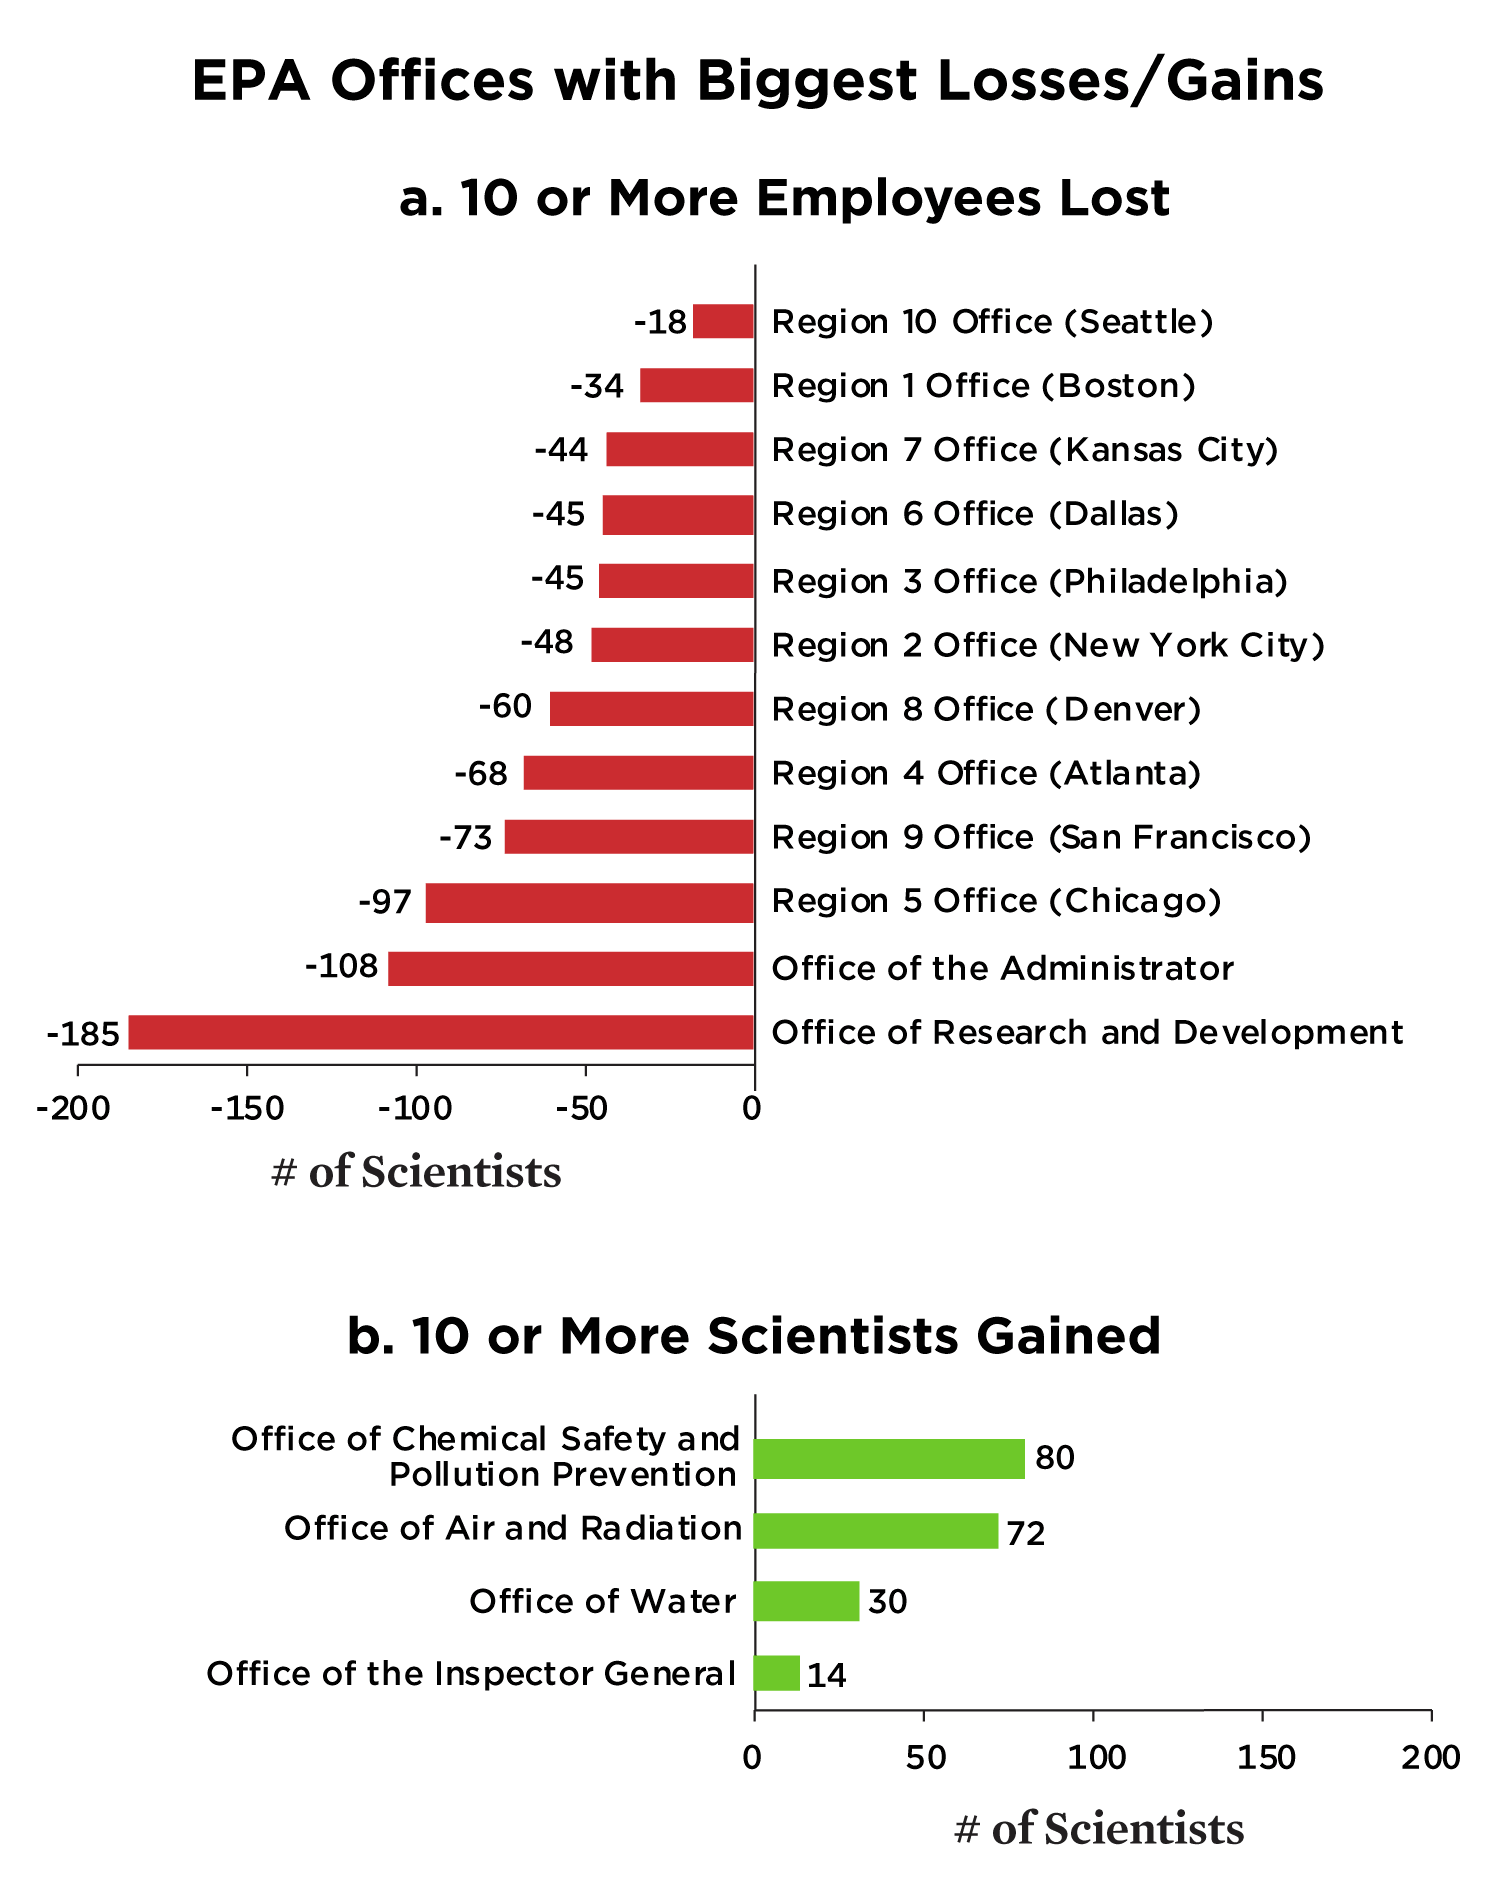 Graph showing scientists gained or lost across EPA regional and programmatic offices